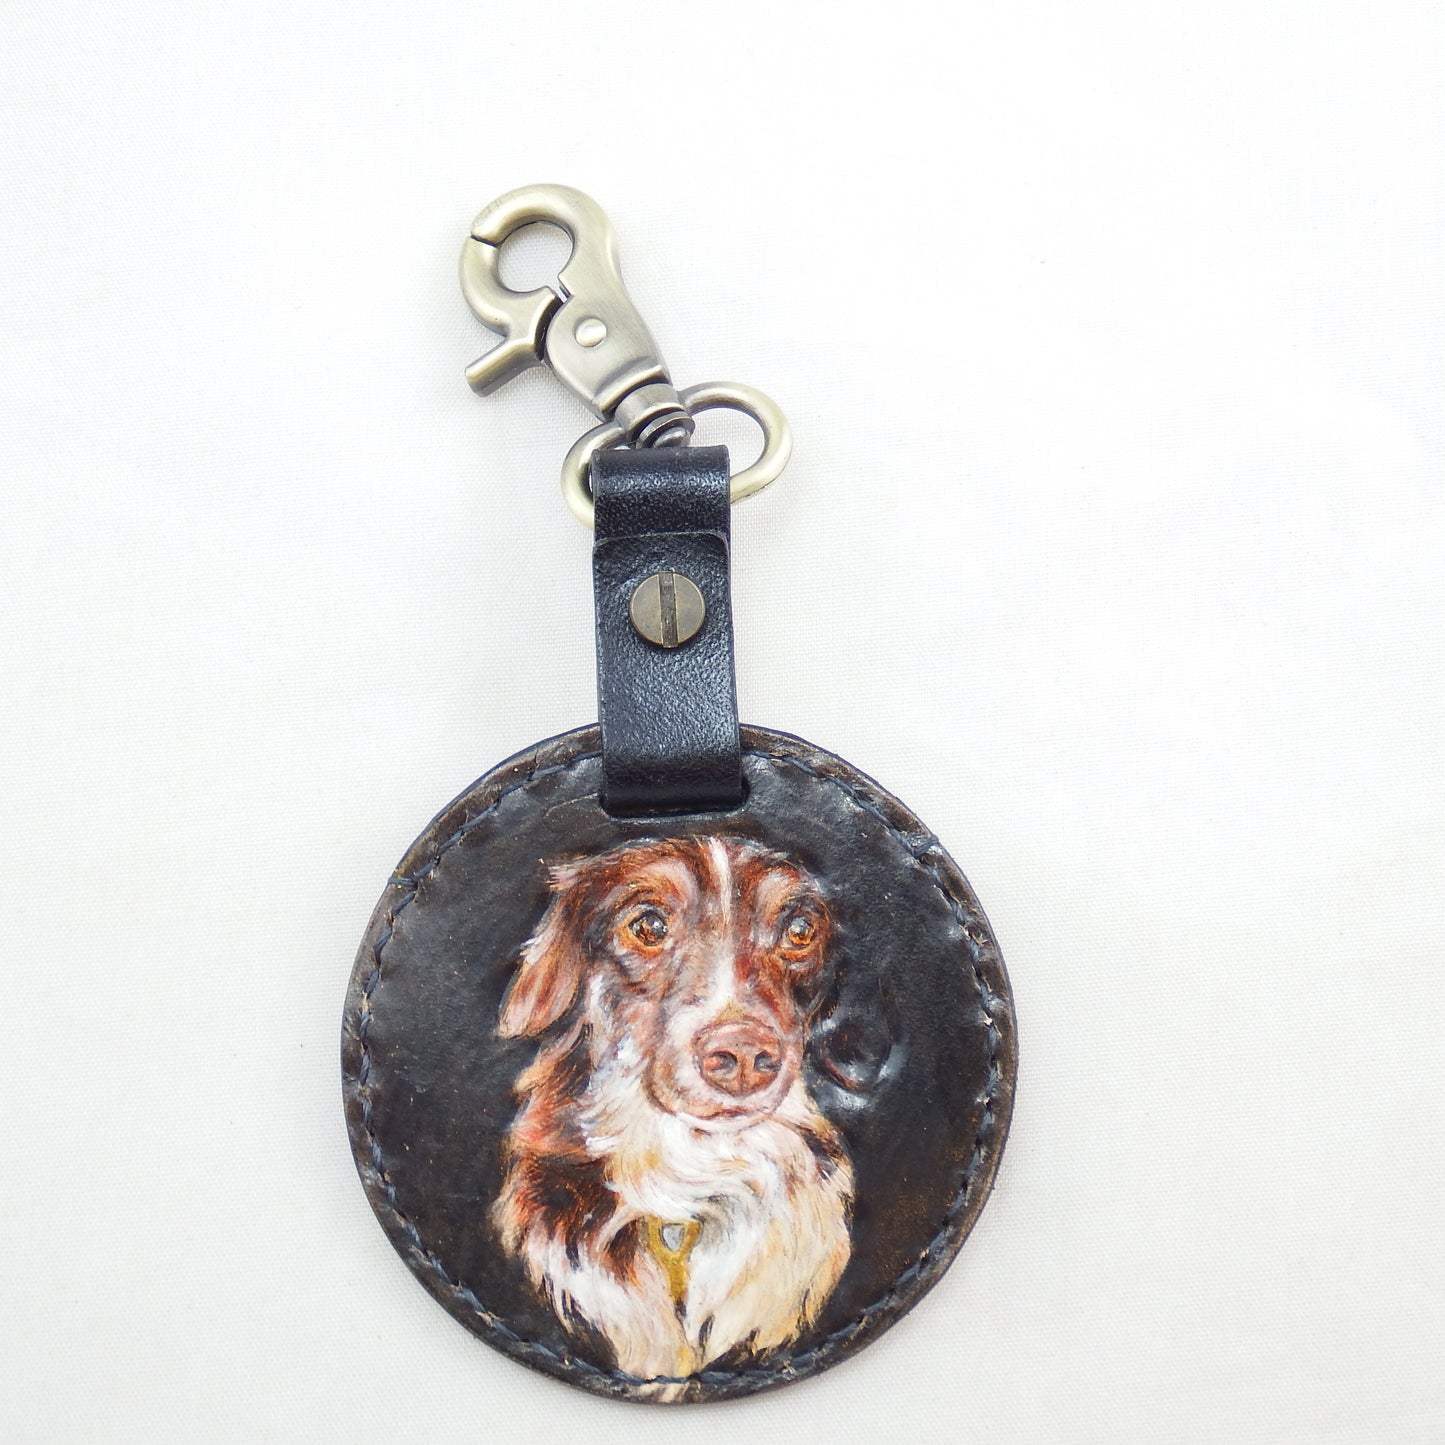 Leather carving keychain, Pet leather keychain, Customized leather carving